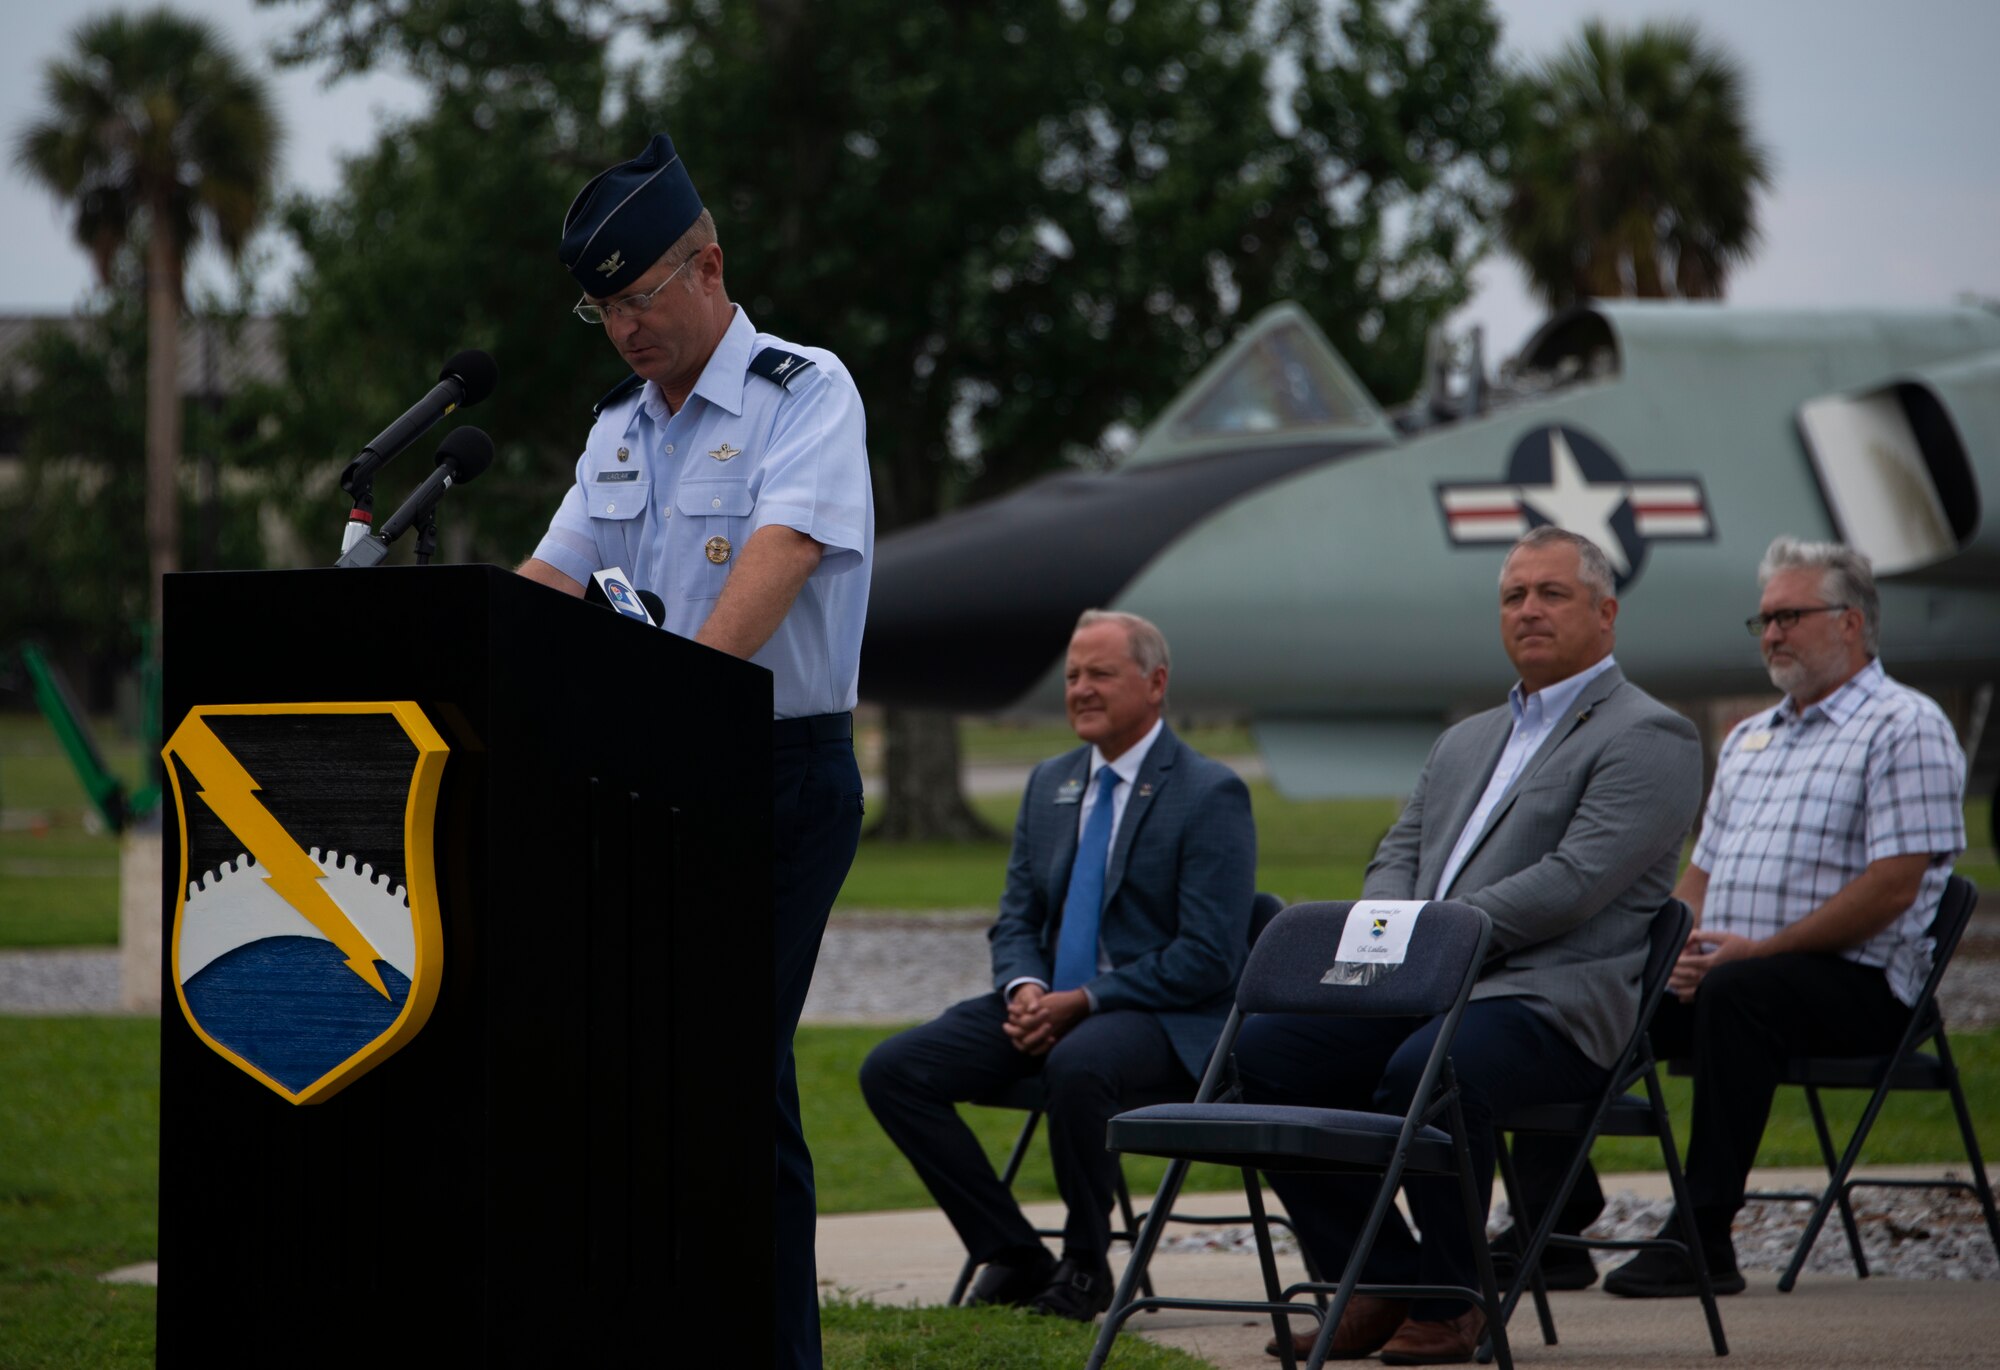 Col. Brian Laidlaw, 325th Fighter Wing commander, speaks during a press conference at Tyndall Air Force Base, Florida, Jun. 17, 2020. The press conference recognized five Community Partnership Program agreements between the base and local community. (U.S. Air Force photo by 2nd Lt. Kayla Fitzgerald)